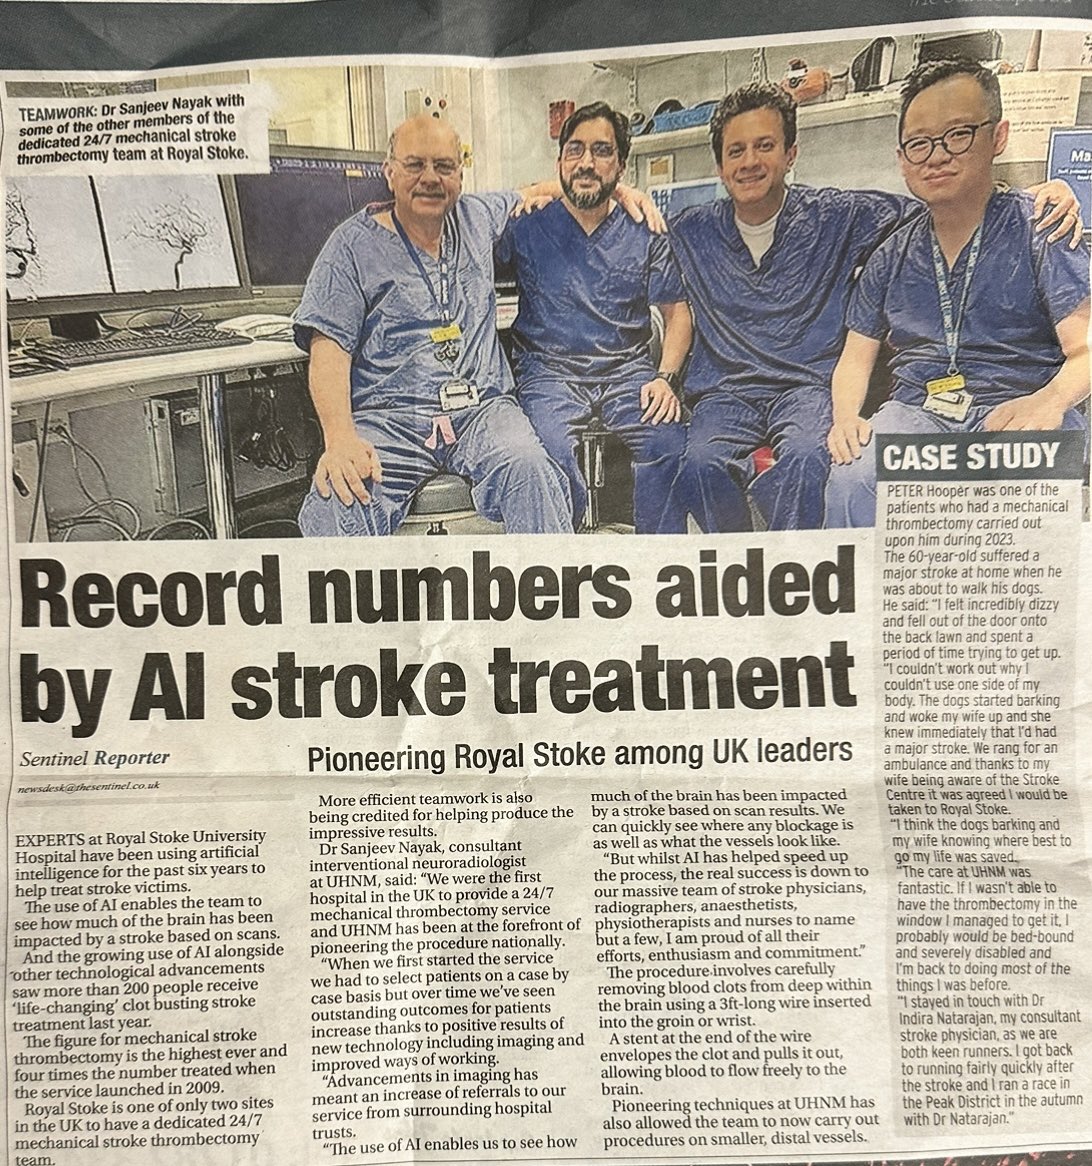 A piece in @Sotlive : The figure for mechanical stroke thrombectomy is the highest ever and four times the number of patients treated when the first in UK 24/7 service was launched at the @UHNM_NHS in 2009. The increase has been made possible mainly due to advancements in